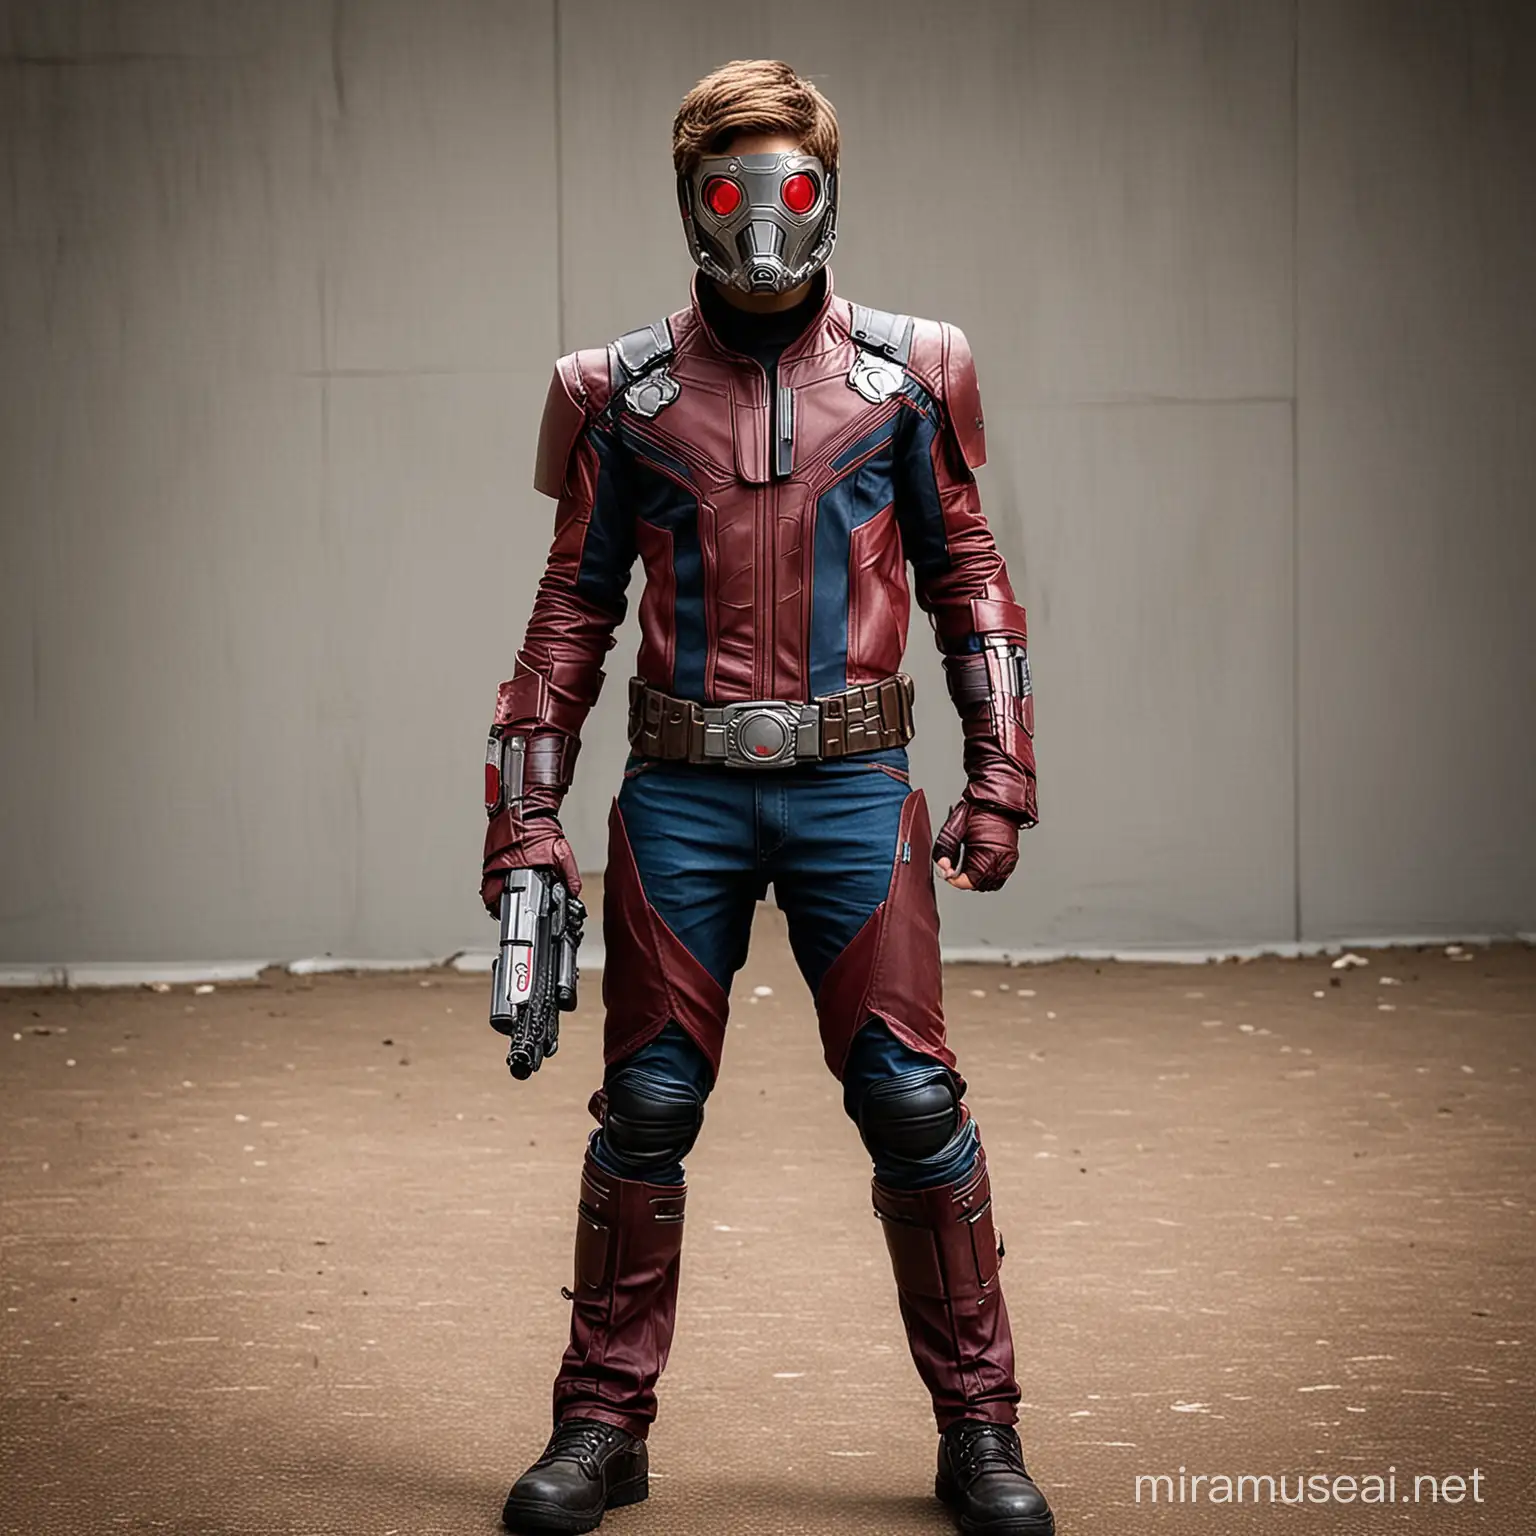 Teenage Boy Cosplaying StarLord from Guardians of the Galaxy